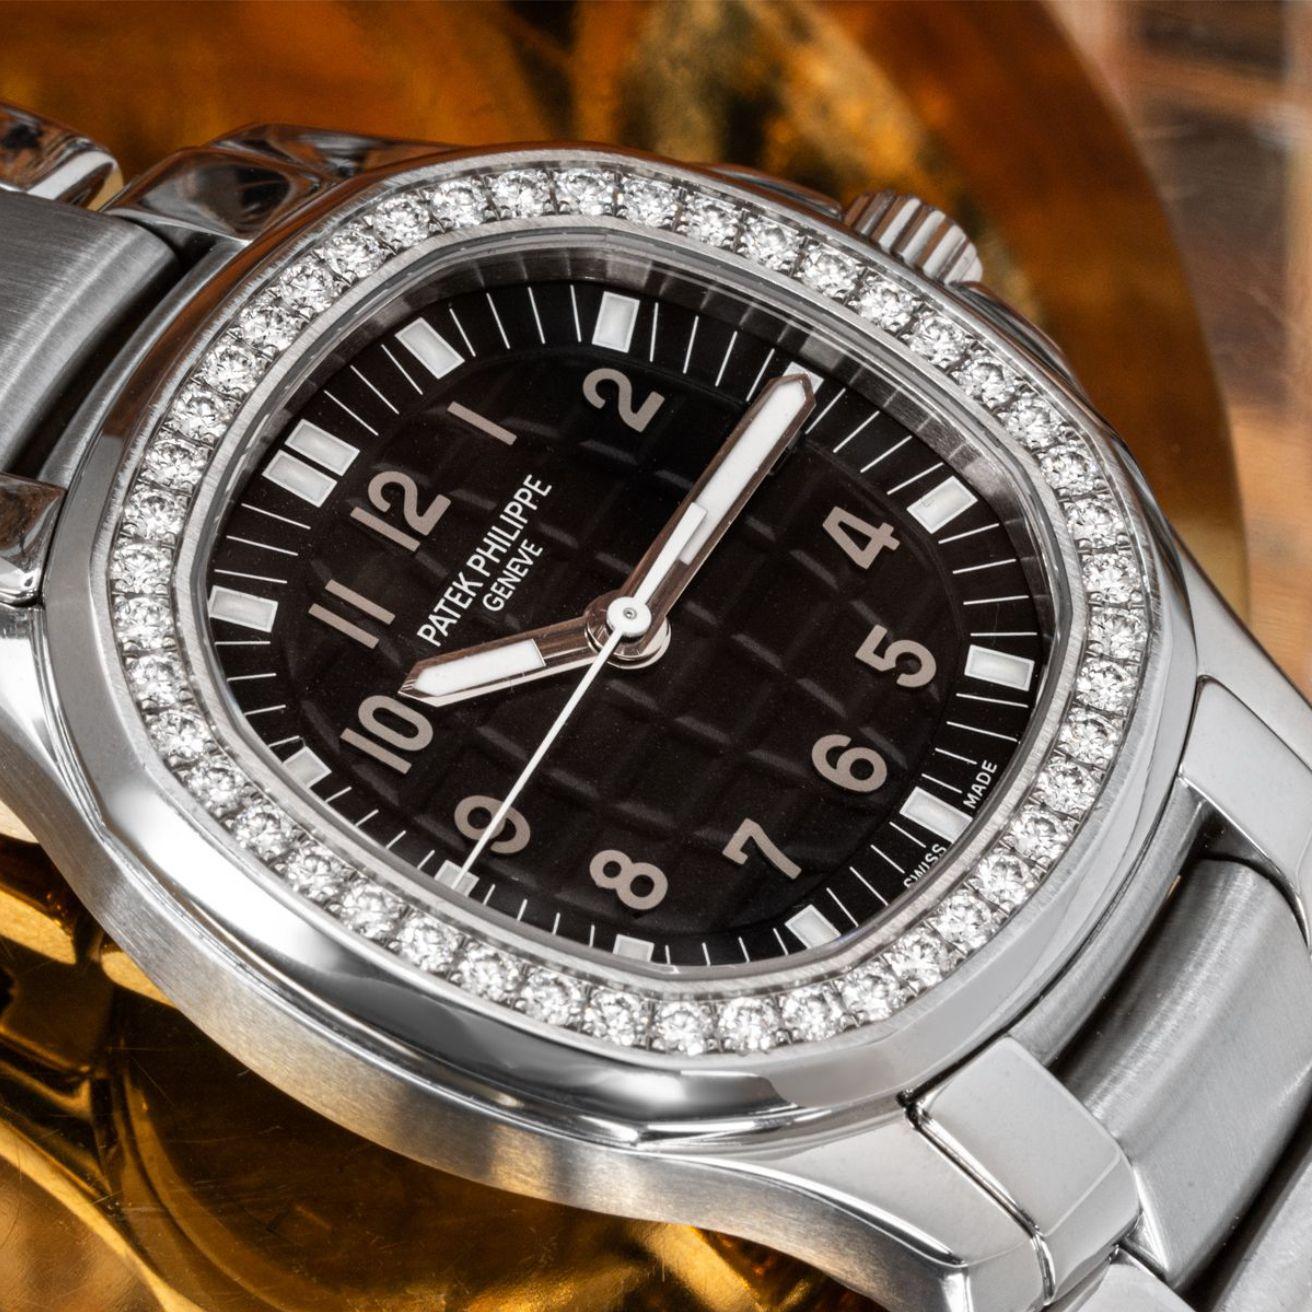 A stainless steel Aquanaut from Patek Philippe. Features a black embossed dial with a date aperture and a stainless steel bezel set with 46 round brilliant cut diamonds weighing 1.00ct.

This timepiece is fitted with a sapphire glass, a quartz